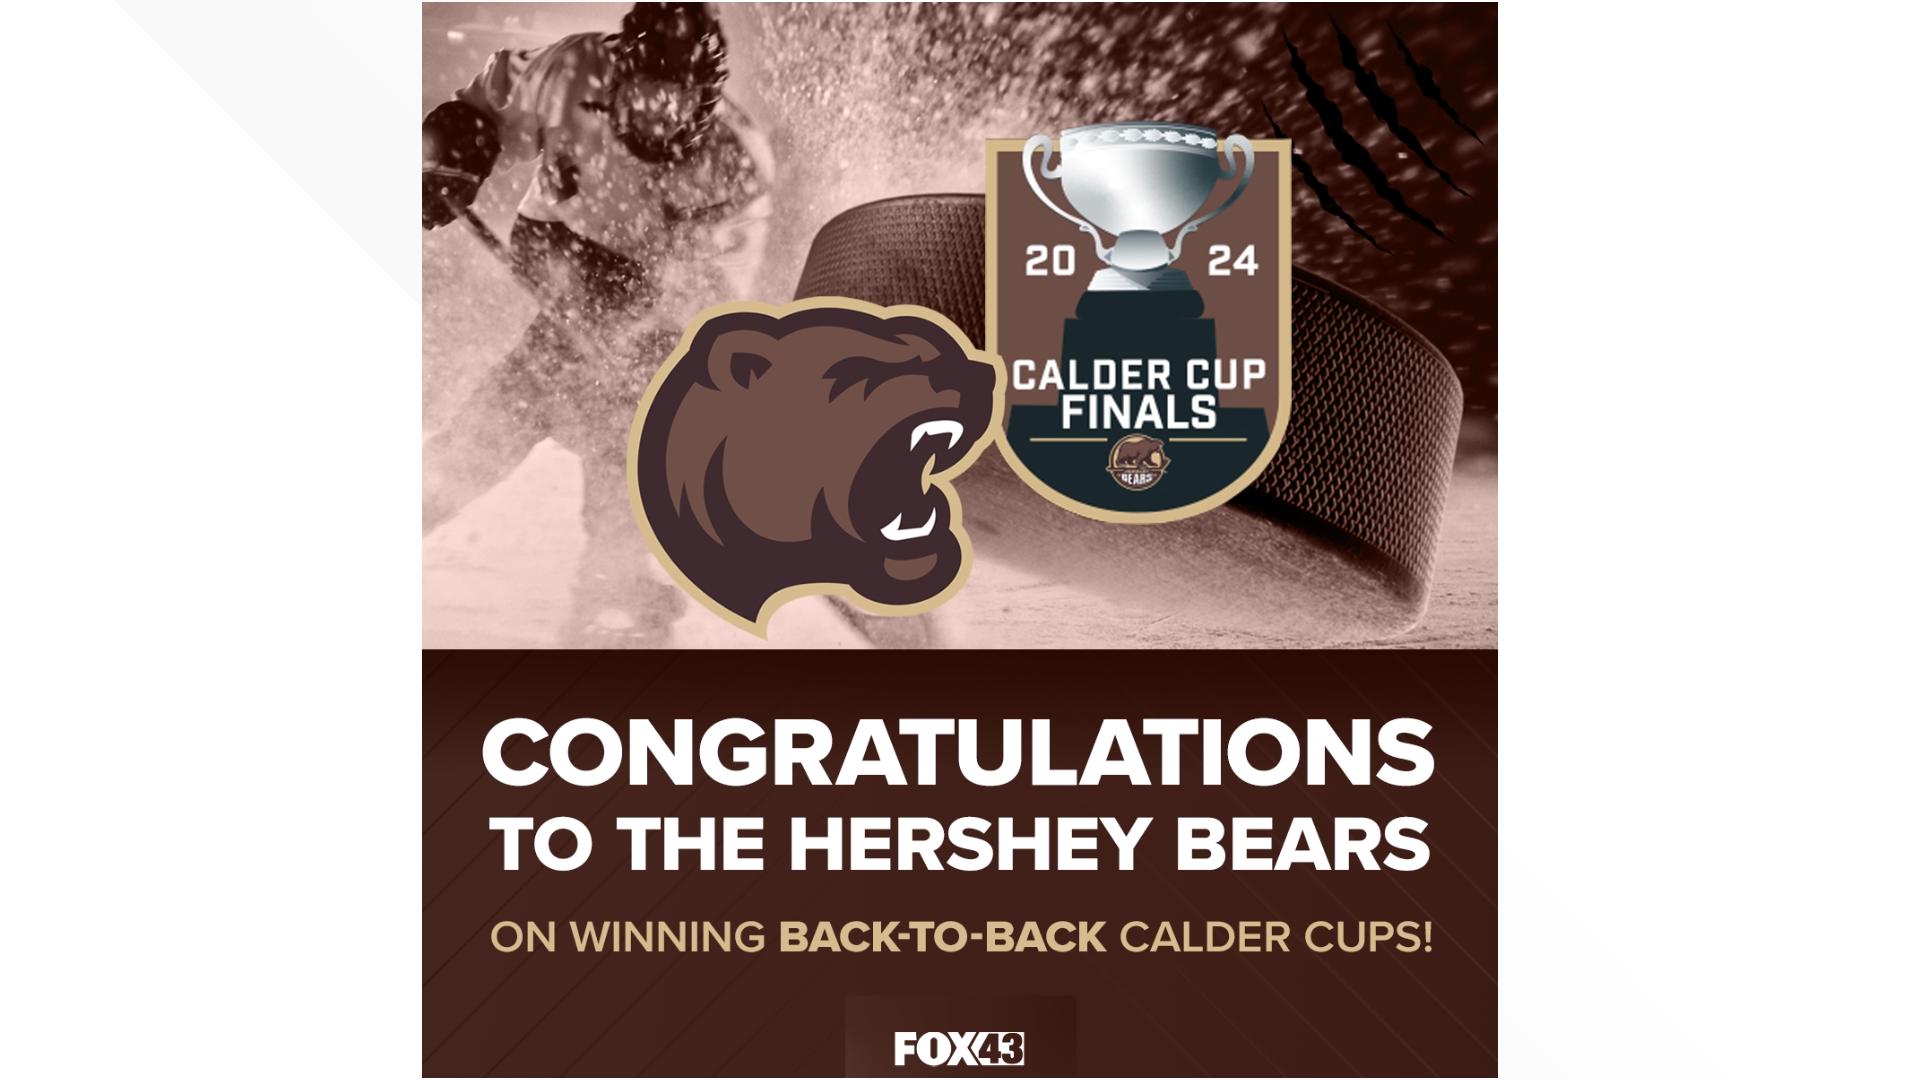 The Hershey Bears scored a game winner in overtime to clinch a Calder Cup championship for the second straight year.